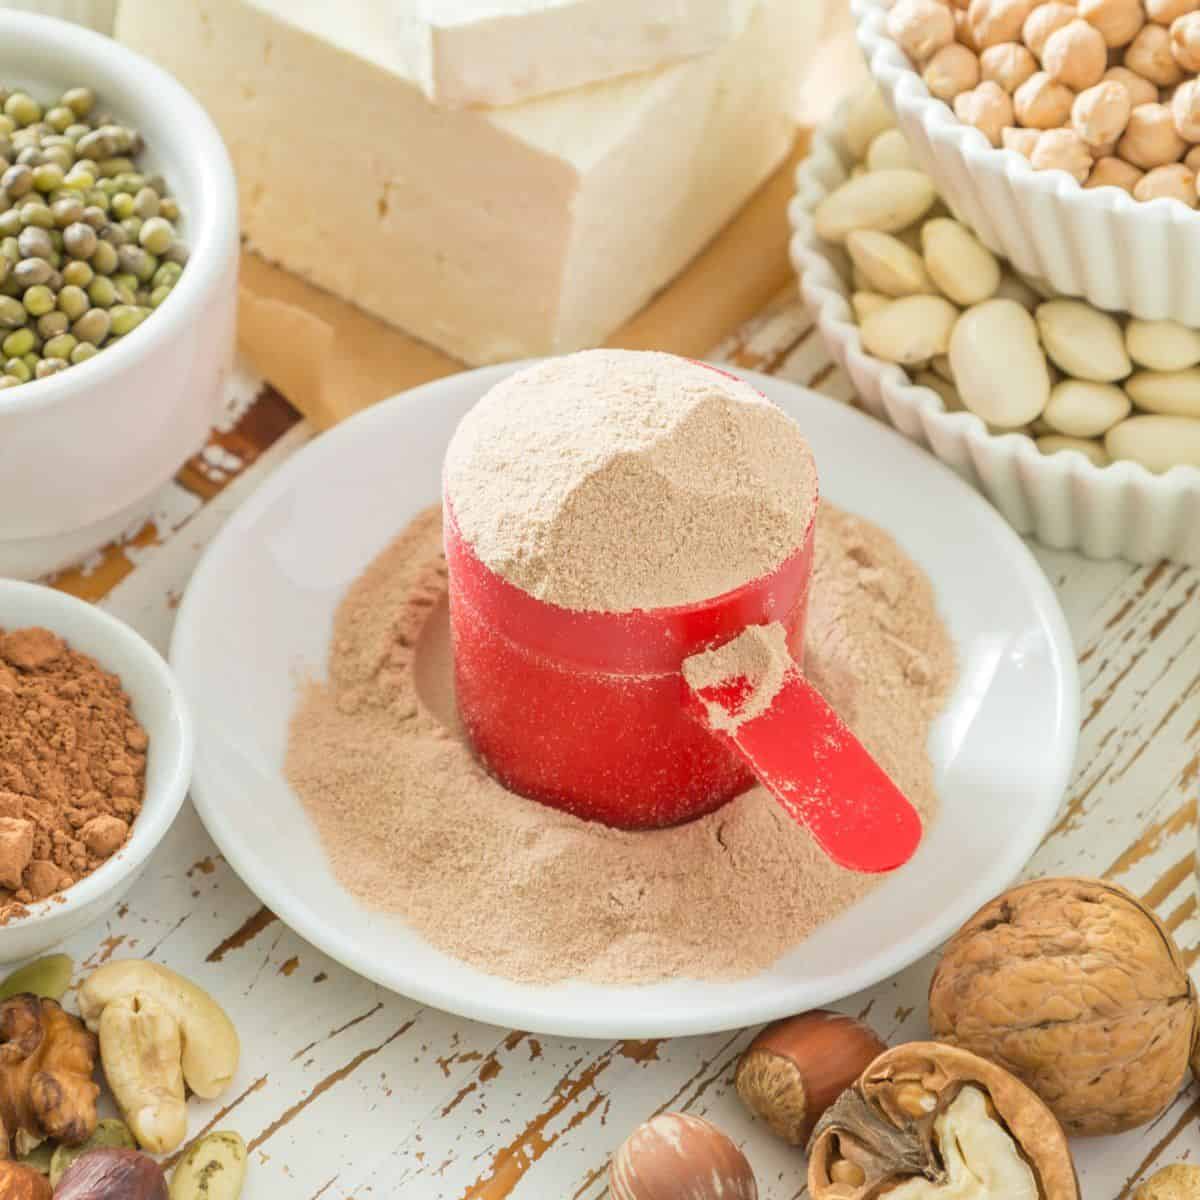 A scoop of a vegan protein powder on a plate surrounded by vegan protein sources including tofu, peas, beans and nuts.